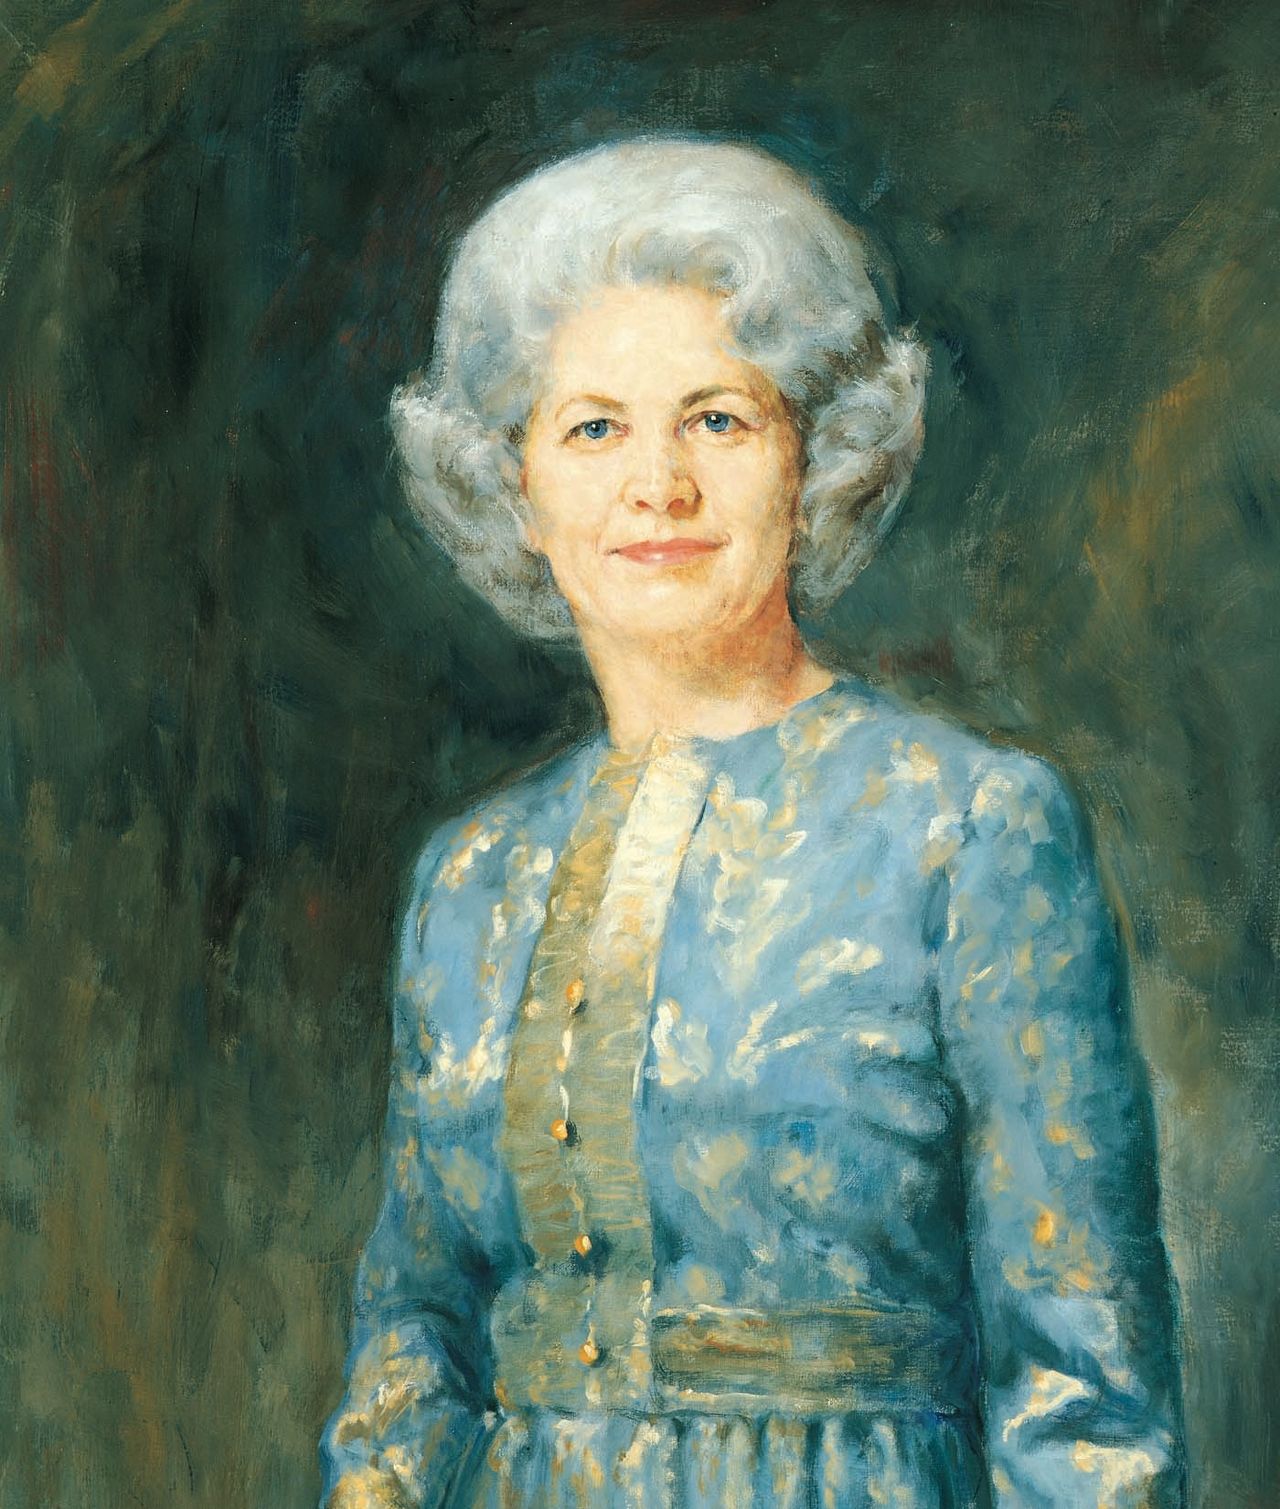 A portrait of Barbara Bradshaw Smith, who was the 10th general president of the Relief Society from 1974 to 1984; painted by Cloy Paulson Kent.